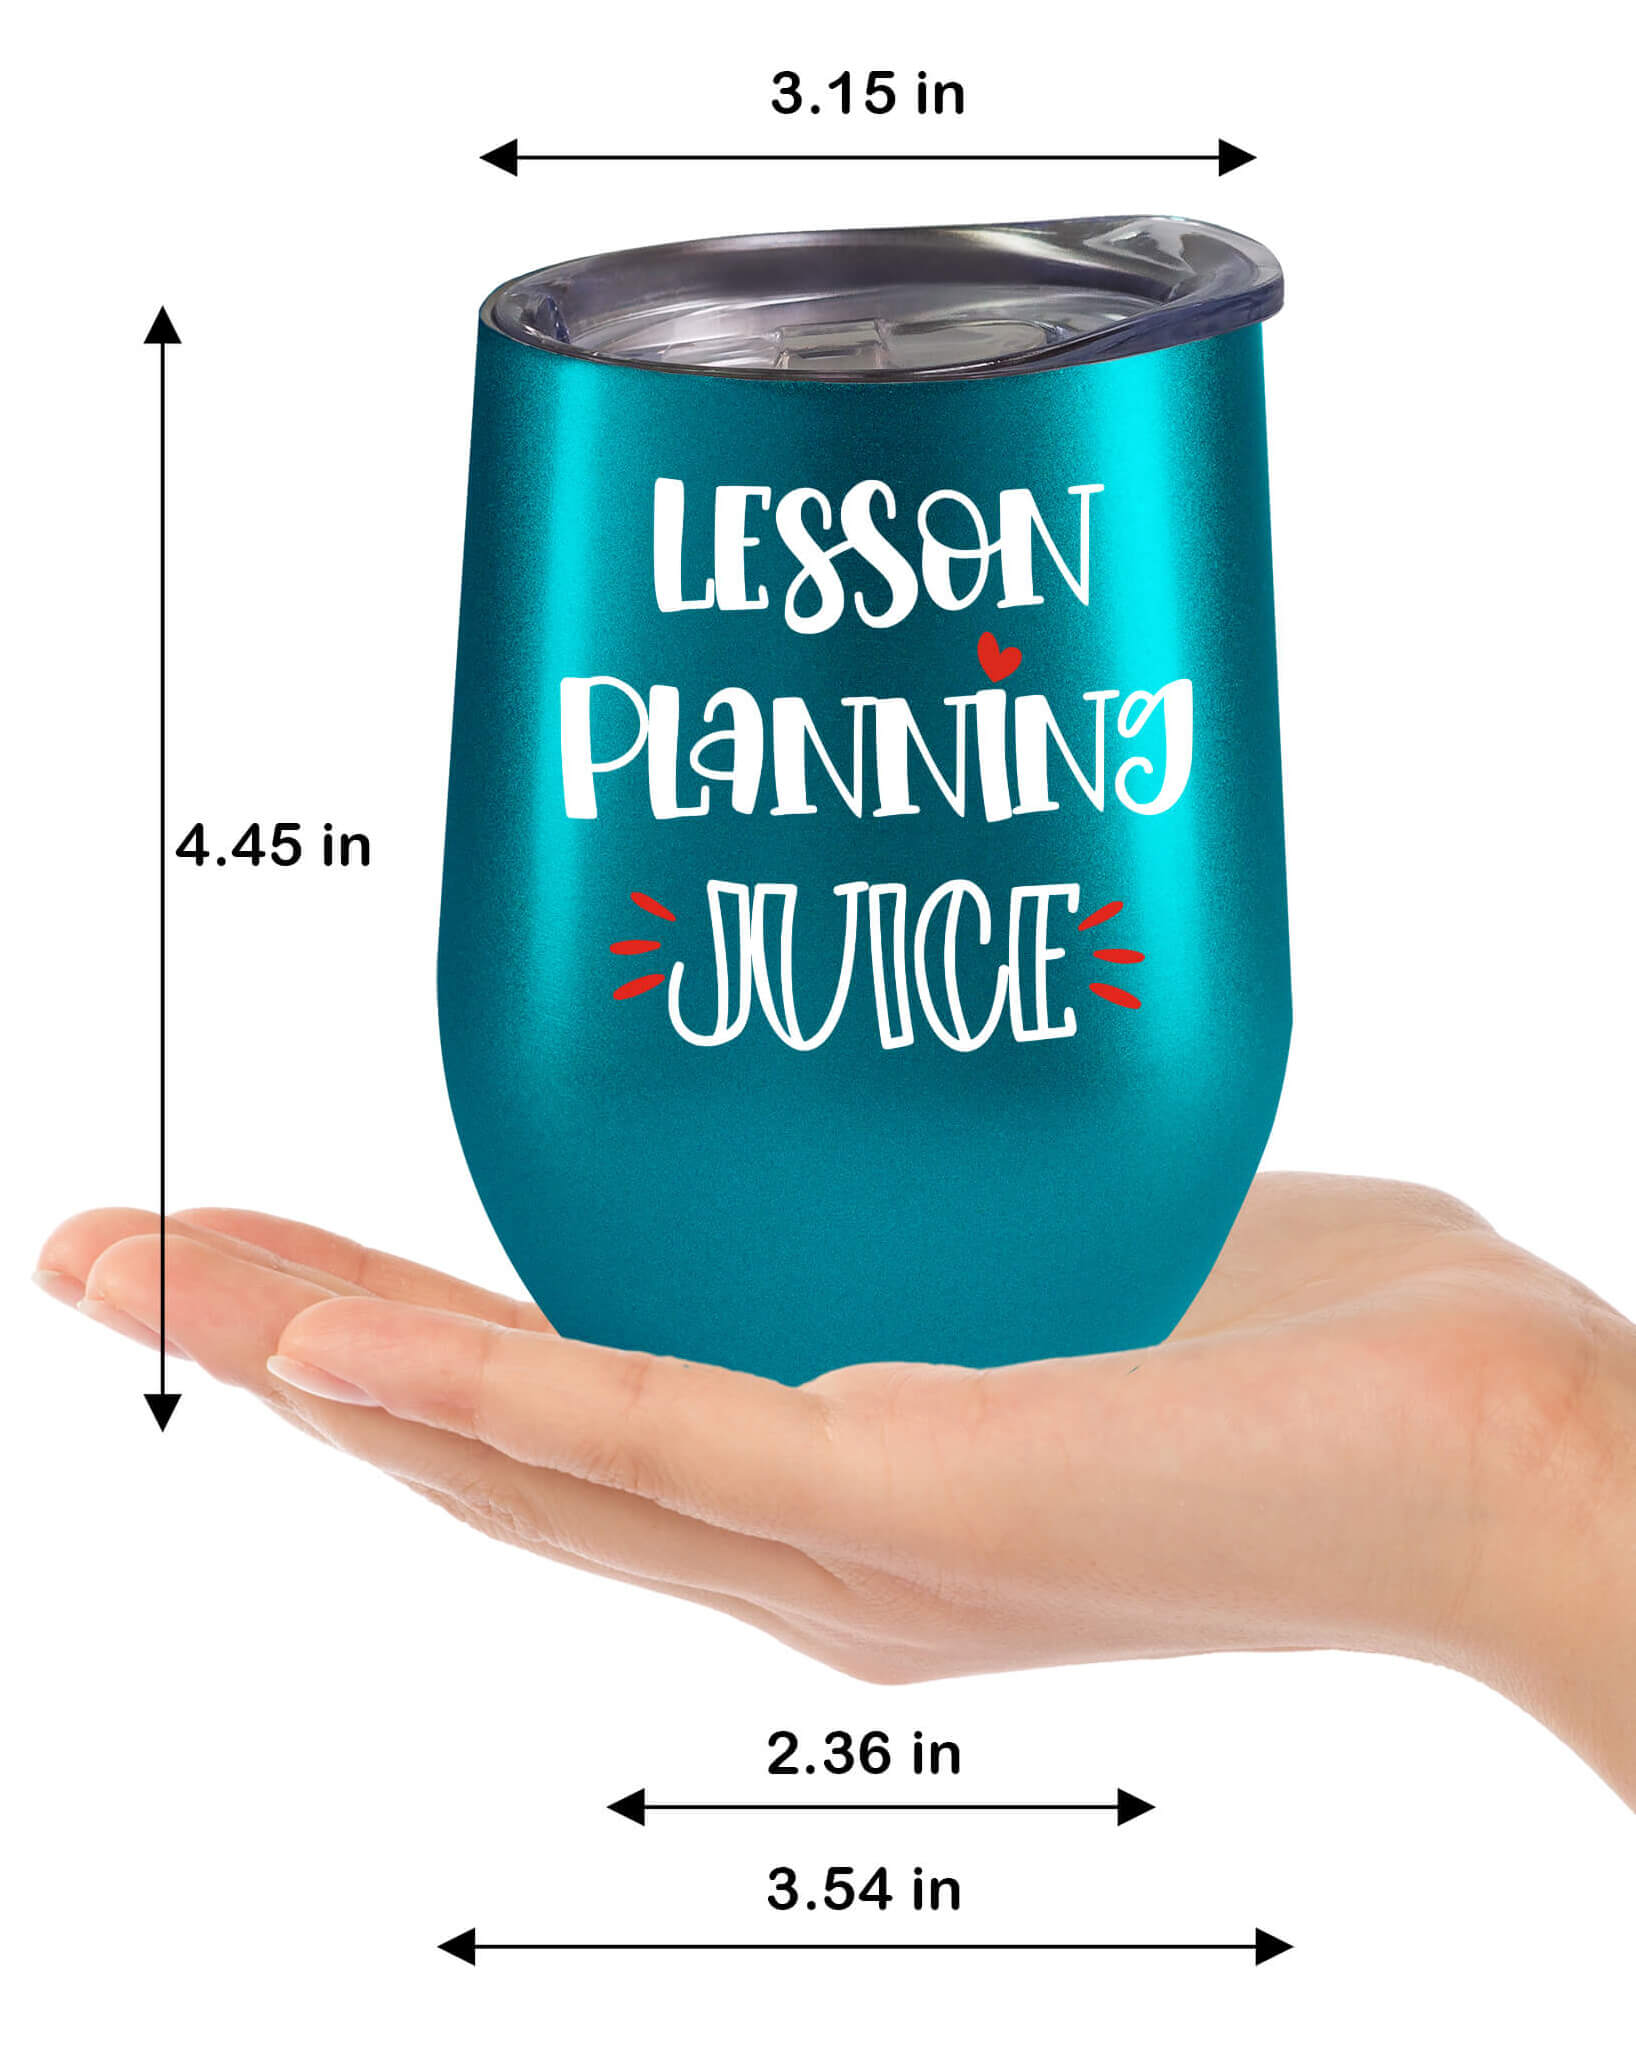 Educator's Companion Tumbler: 'Lesson Planning Juice' 12 oz Stainless Steel Cup for Teachers - fancyfams